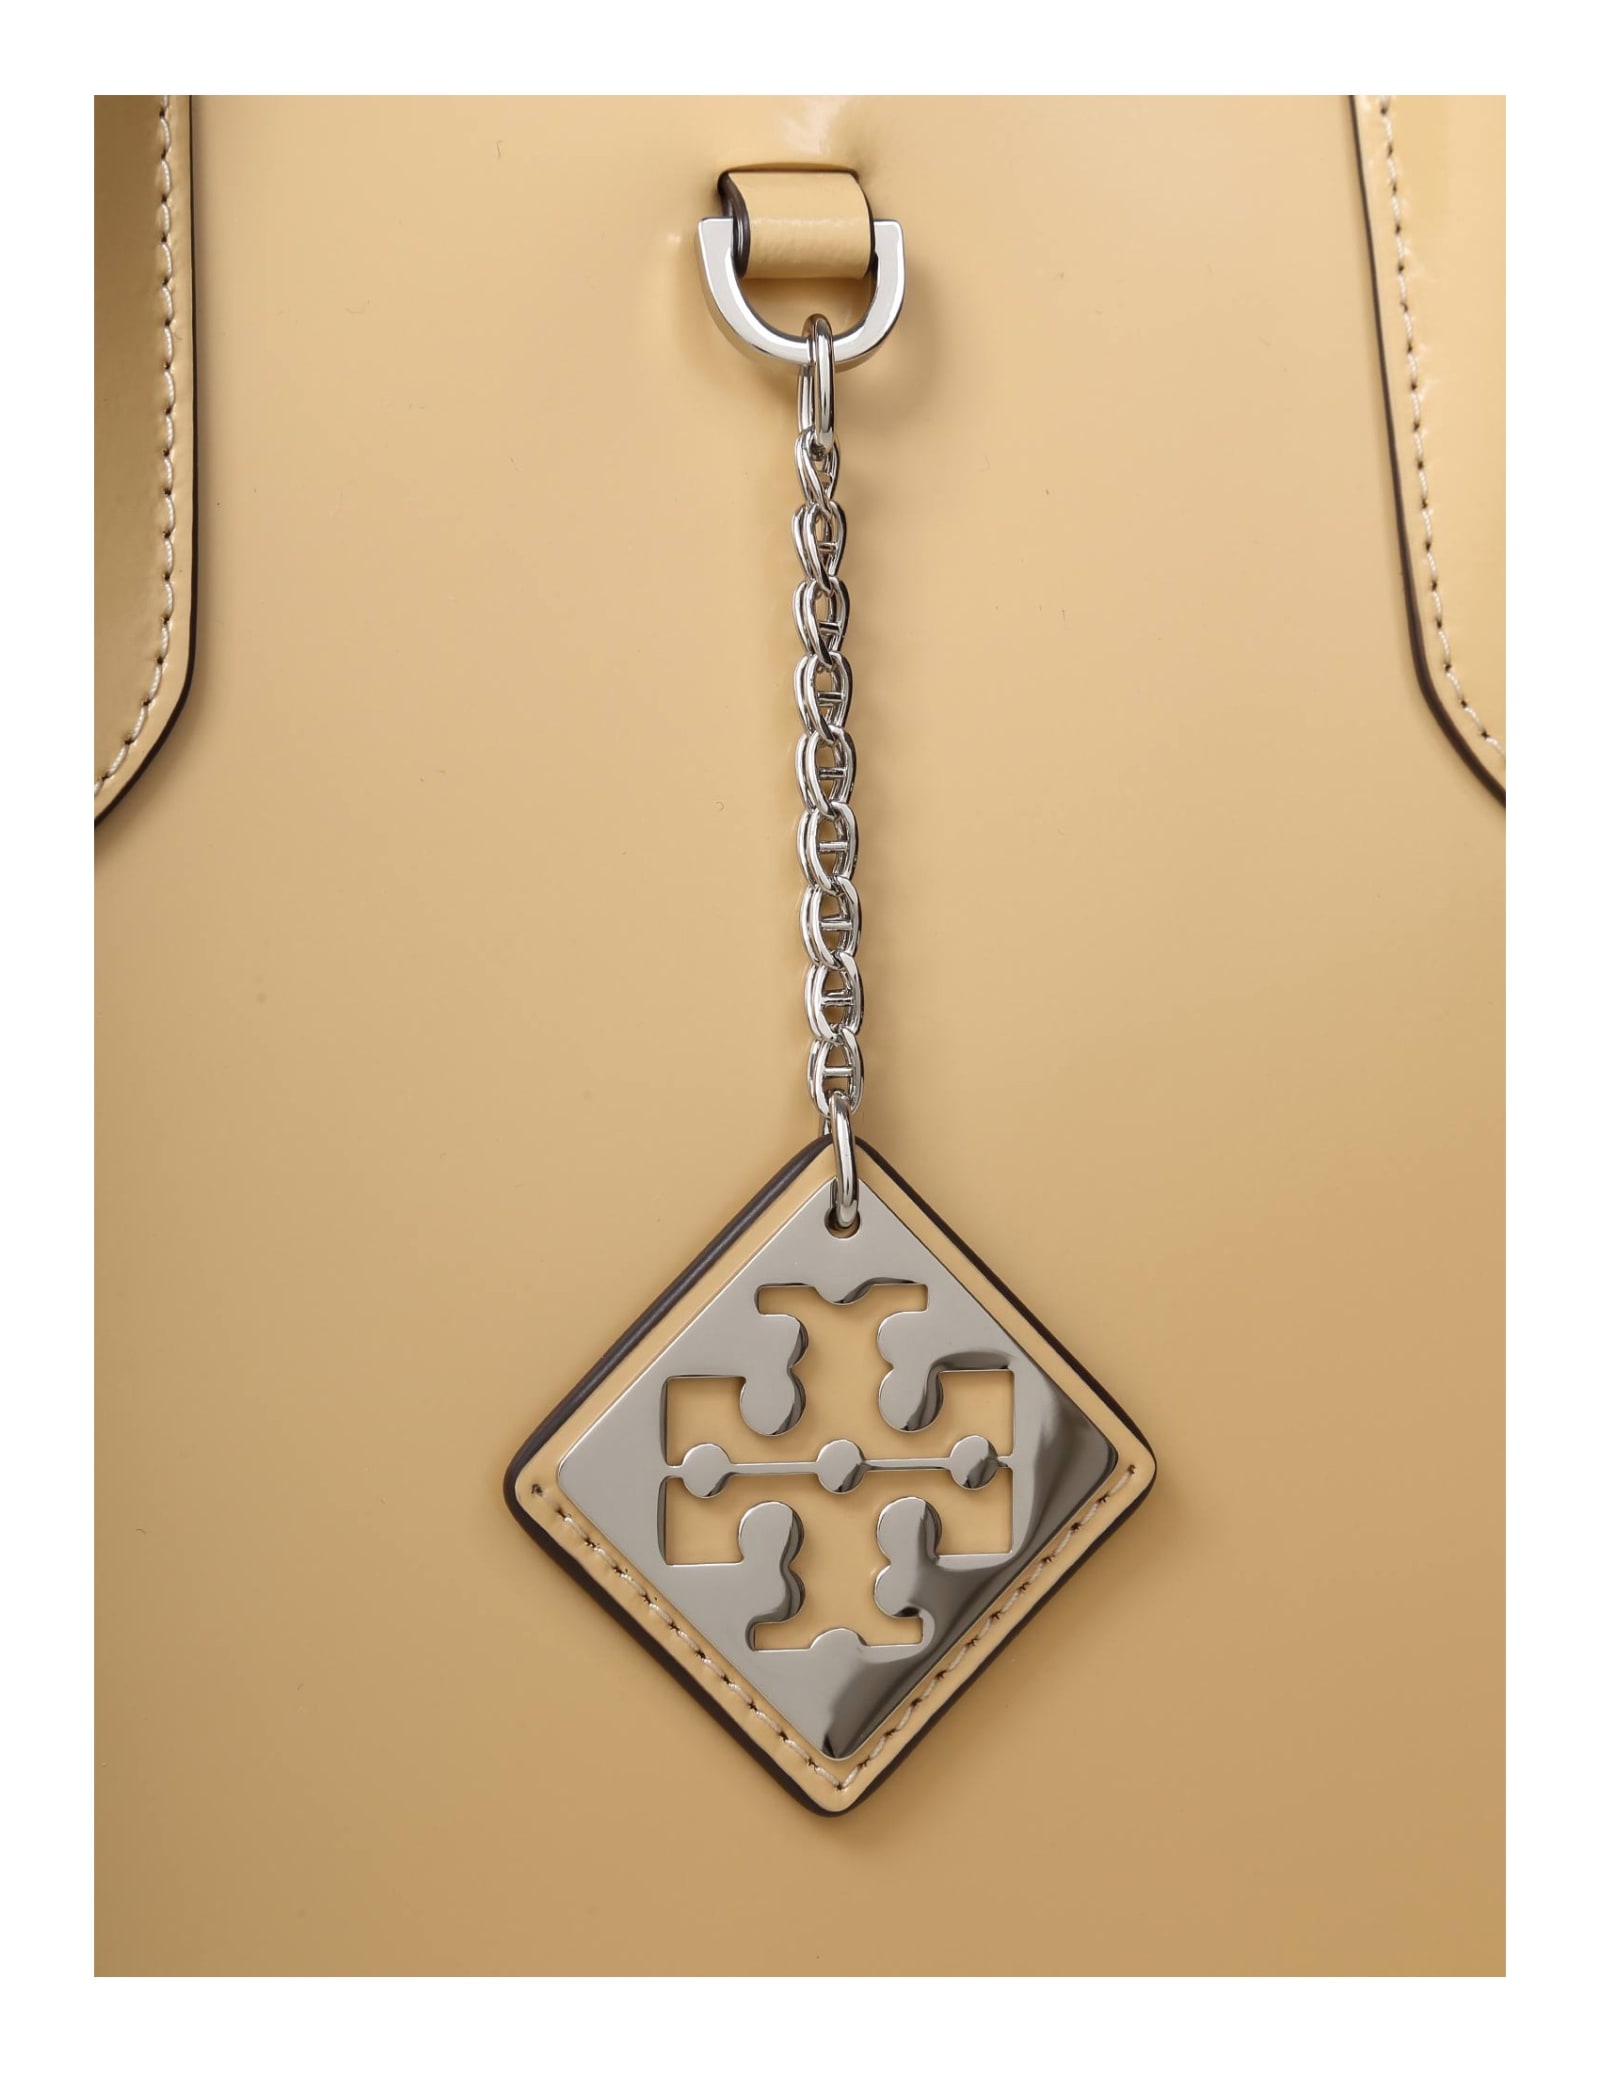 Shop Tory Burch Swing Bag In Almond Brushed Leather